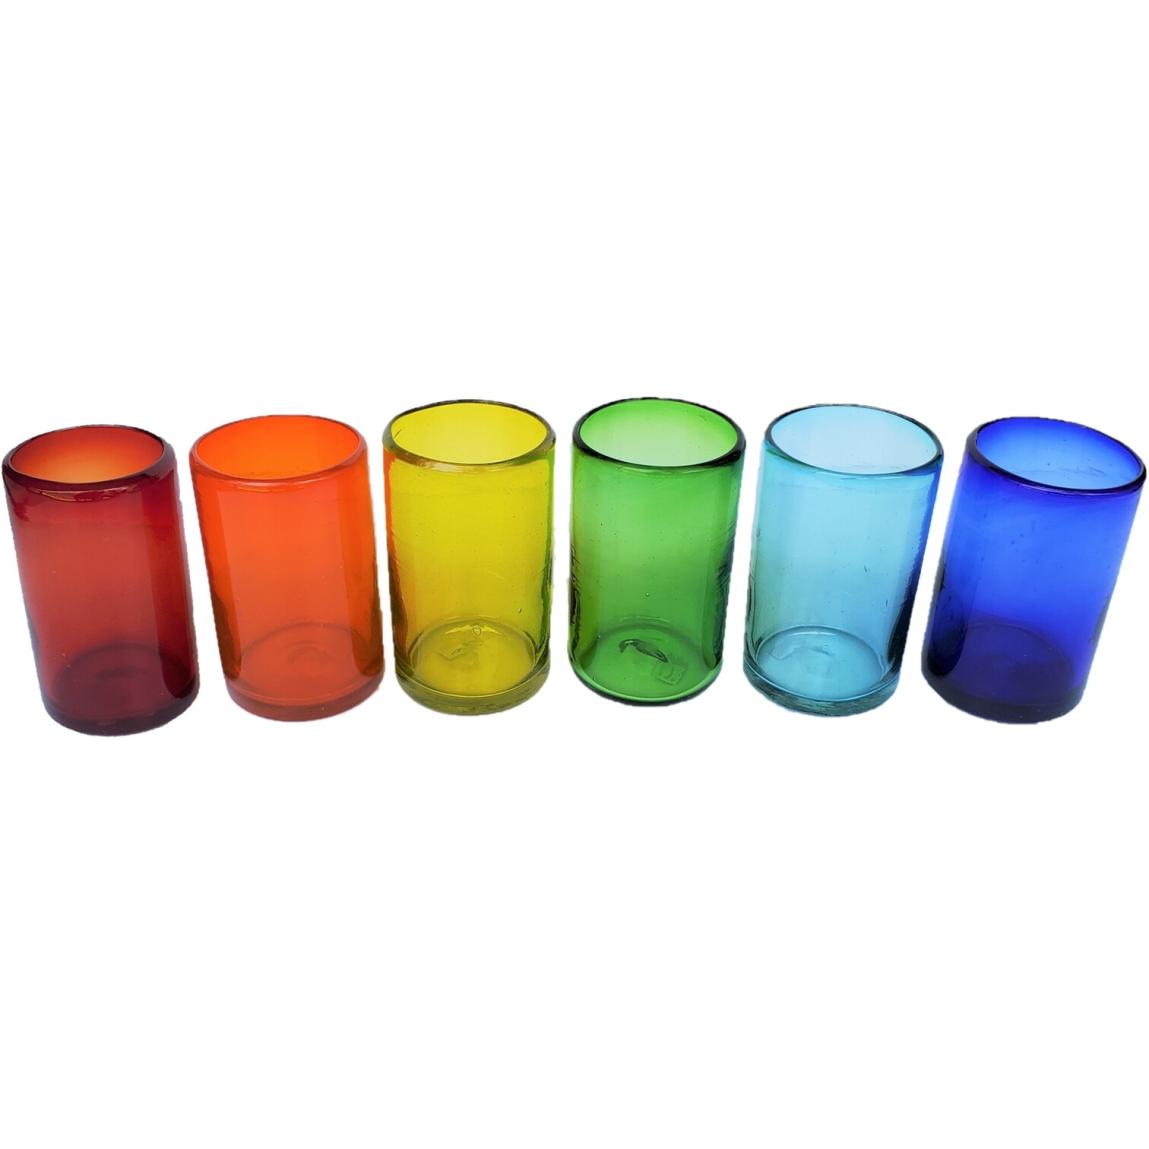 New Items / Rainbow Colored 14 oz Drinking Glasses  / These handcrafted glasses deliver a classic touch to your favorite drink.